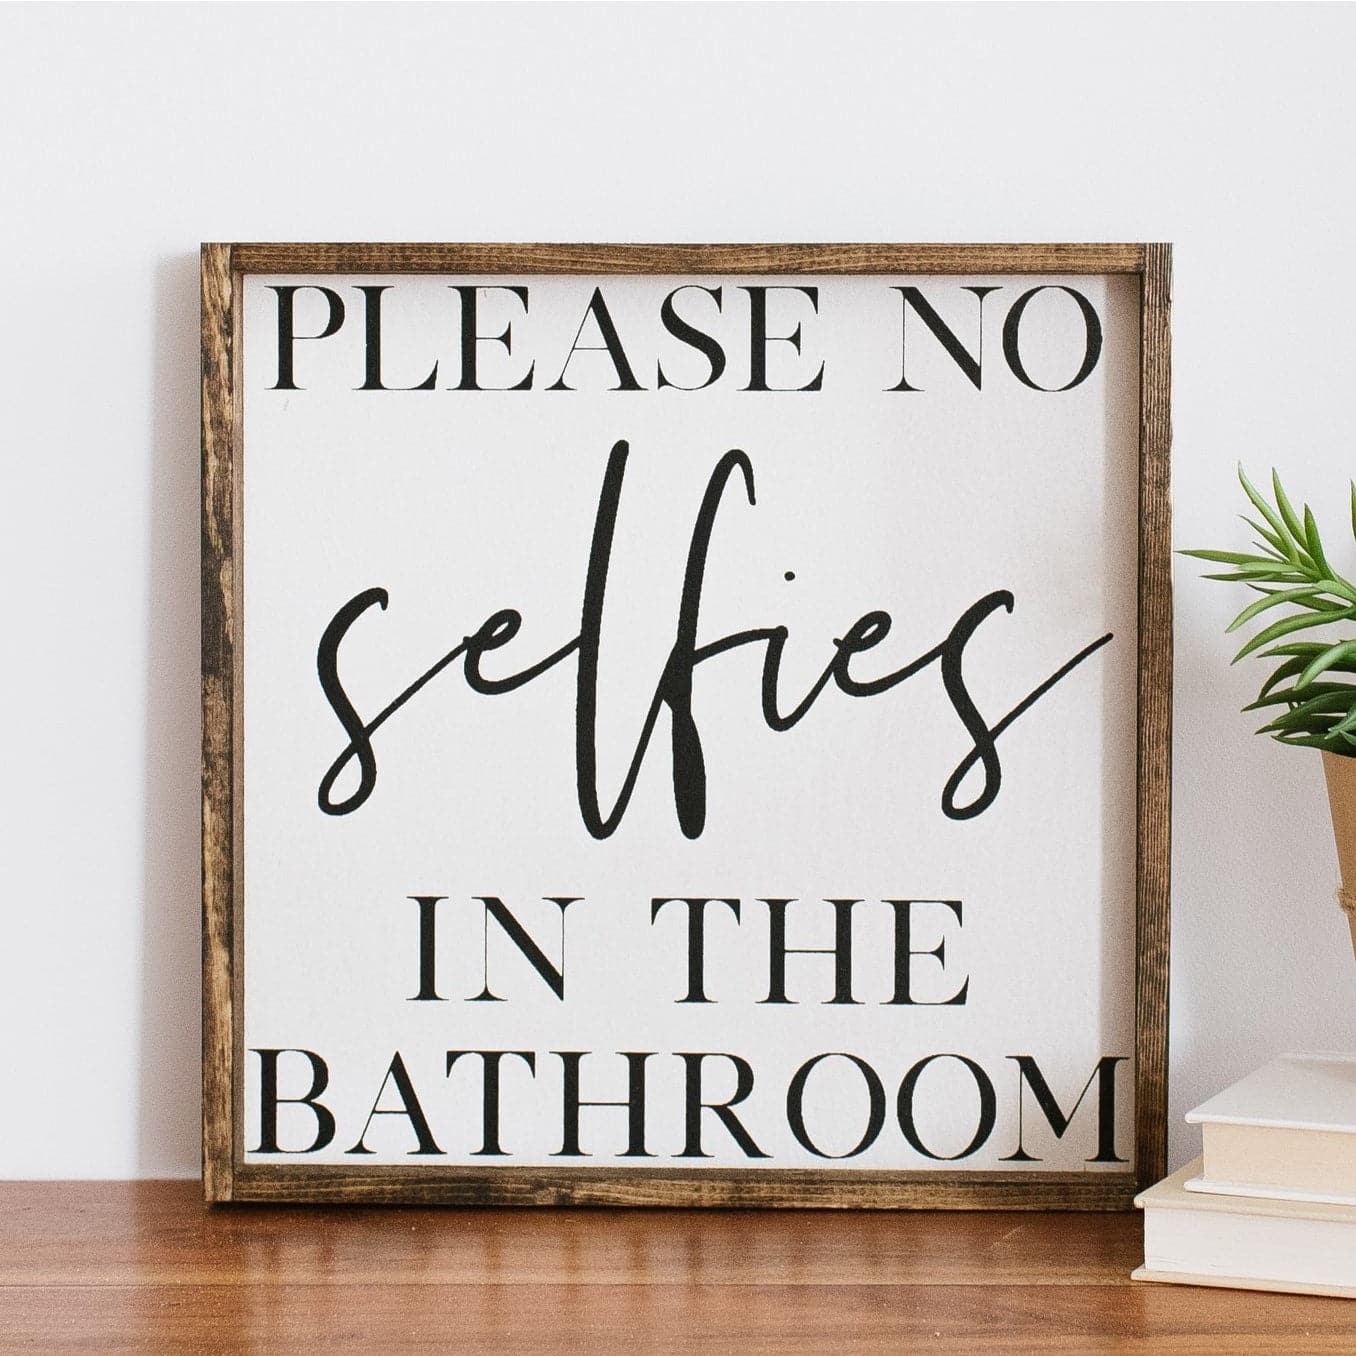 Please No Selfies in the Bathroom | Wood Sign - The Local Space